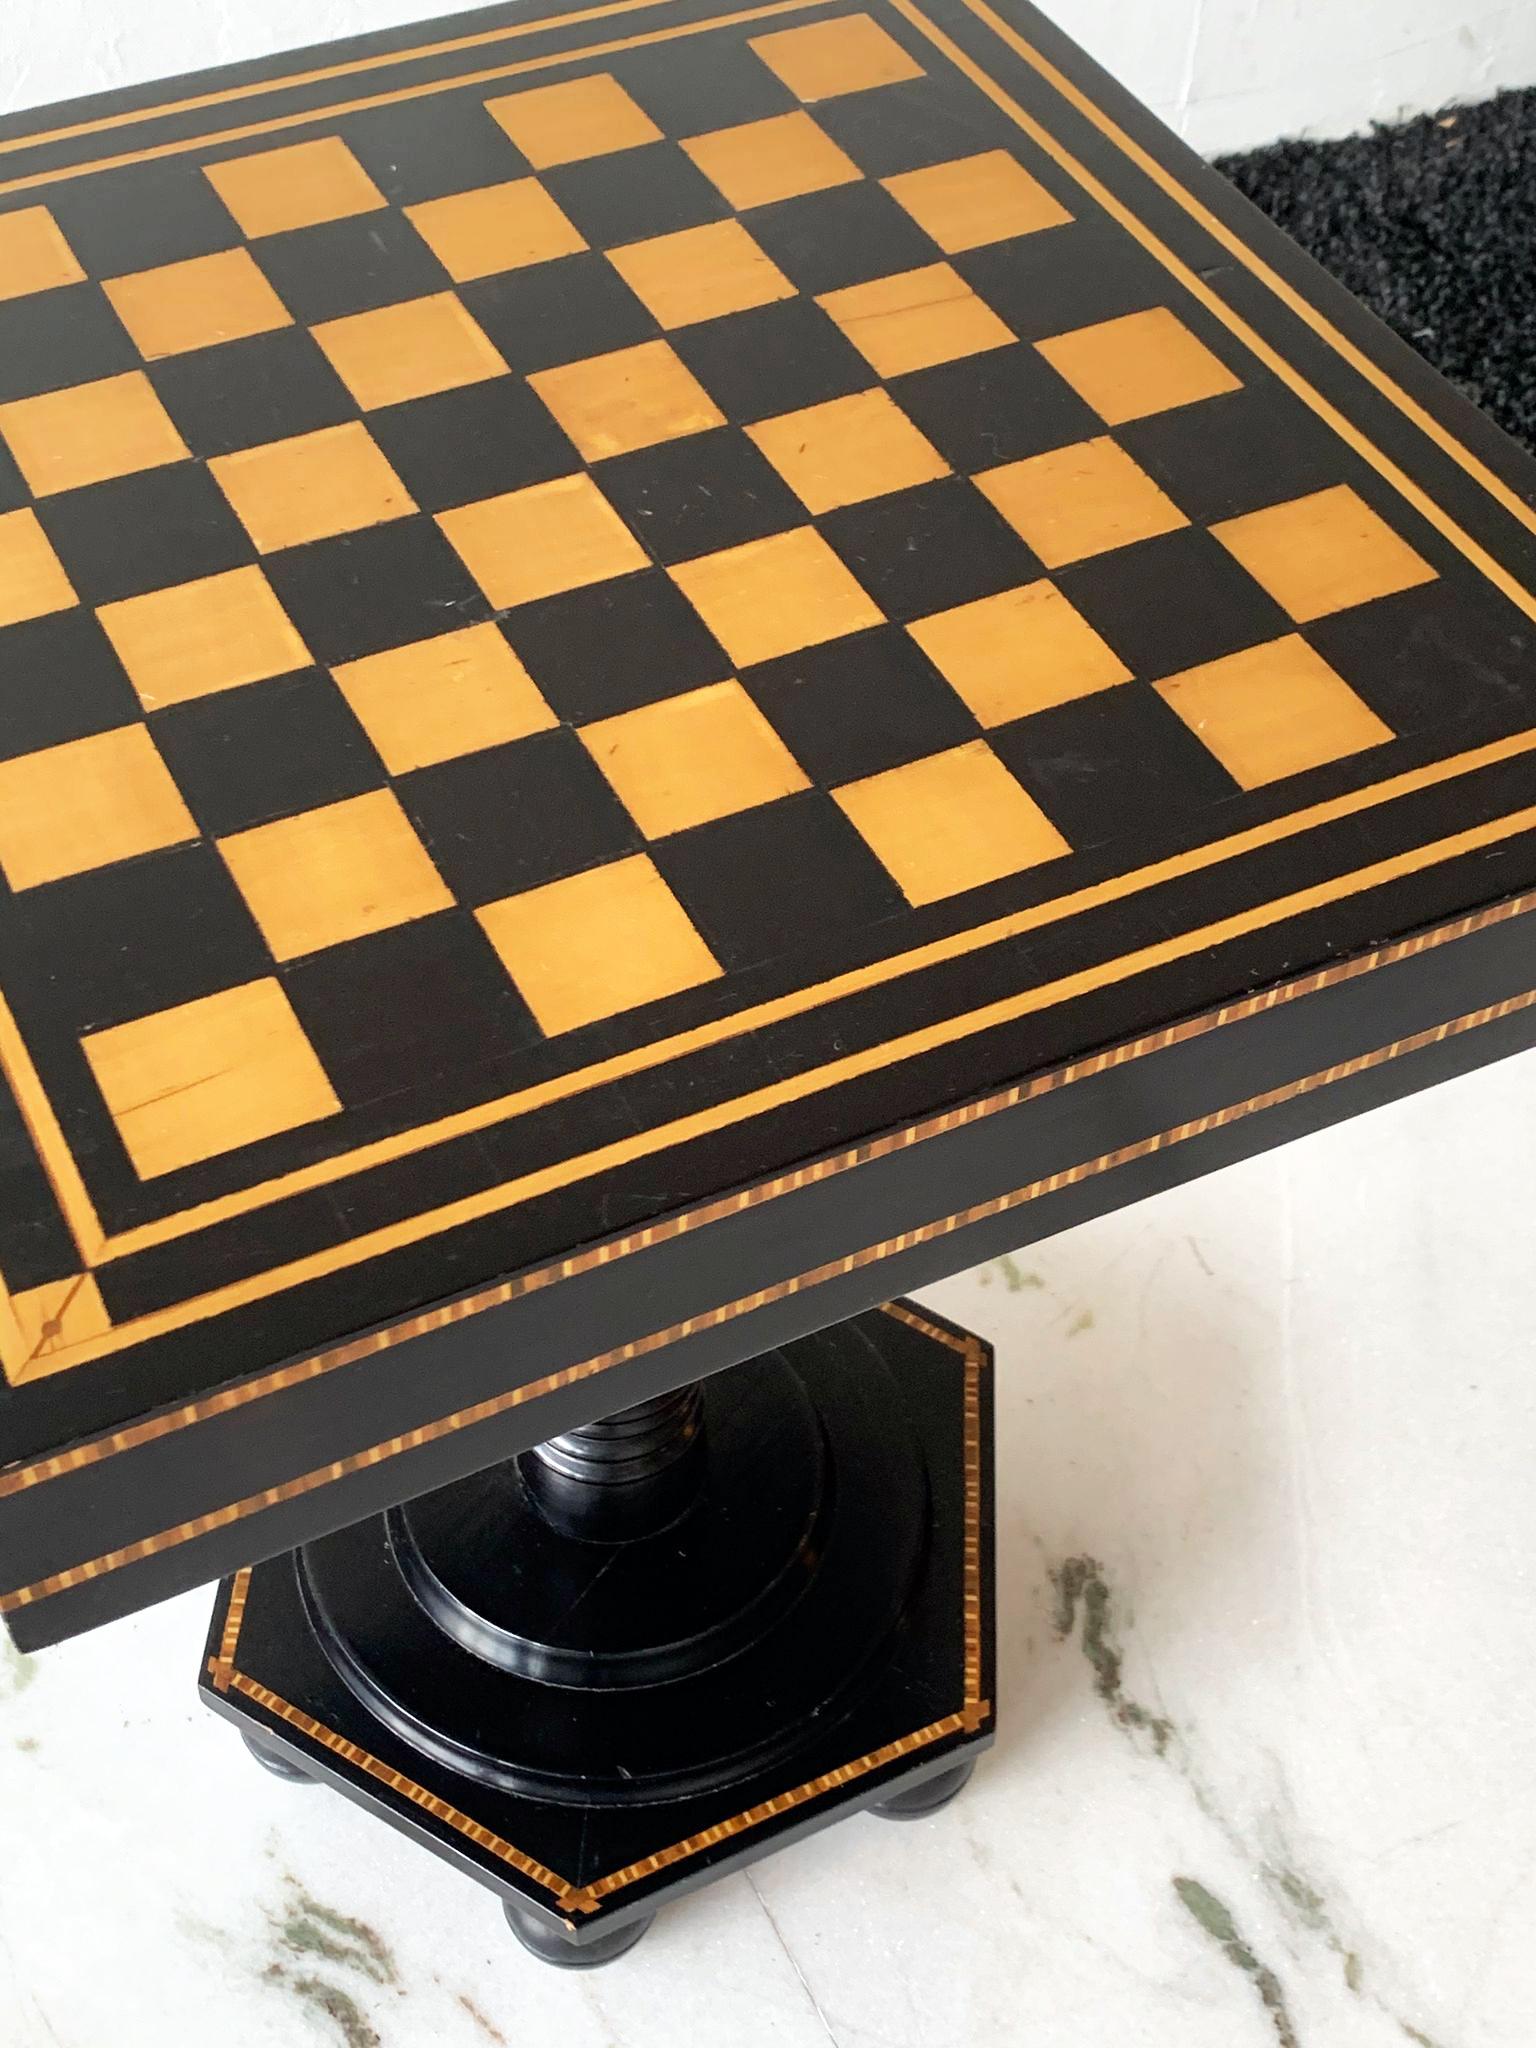 Ebonized and Inlaid Art Deco Game Table with Chess Pieces 2